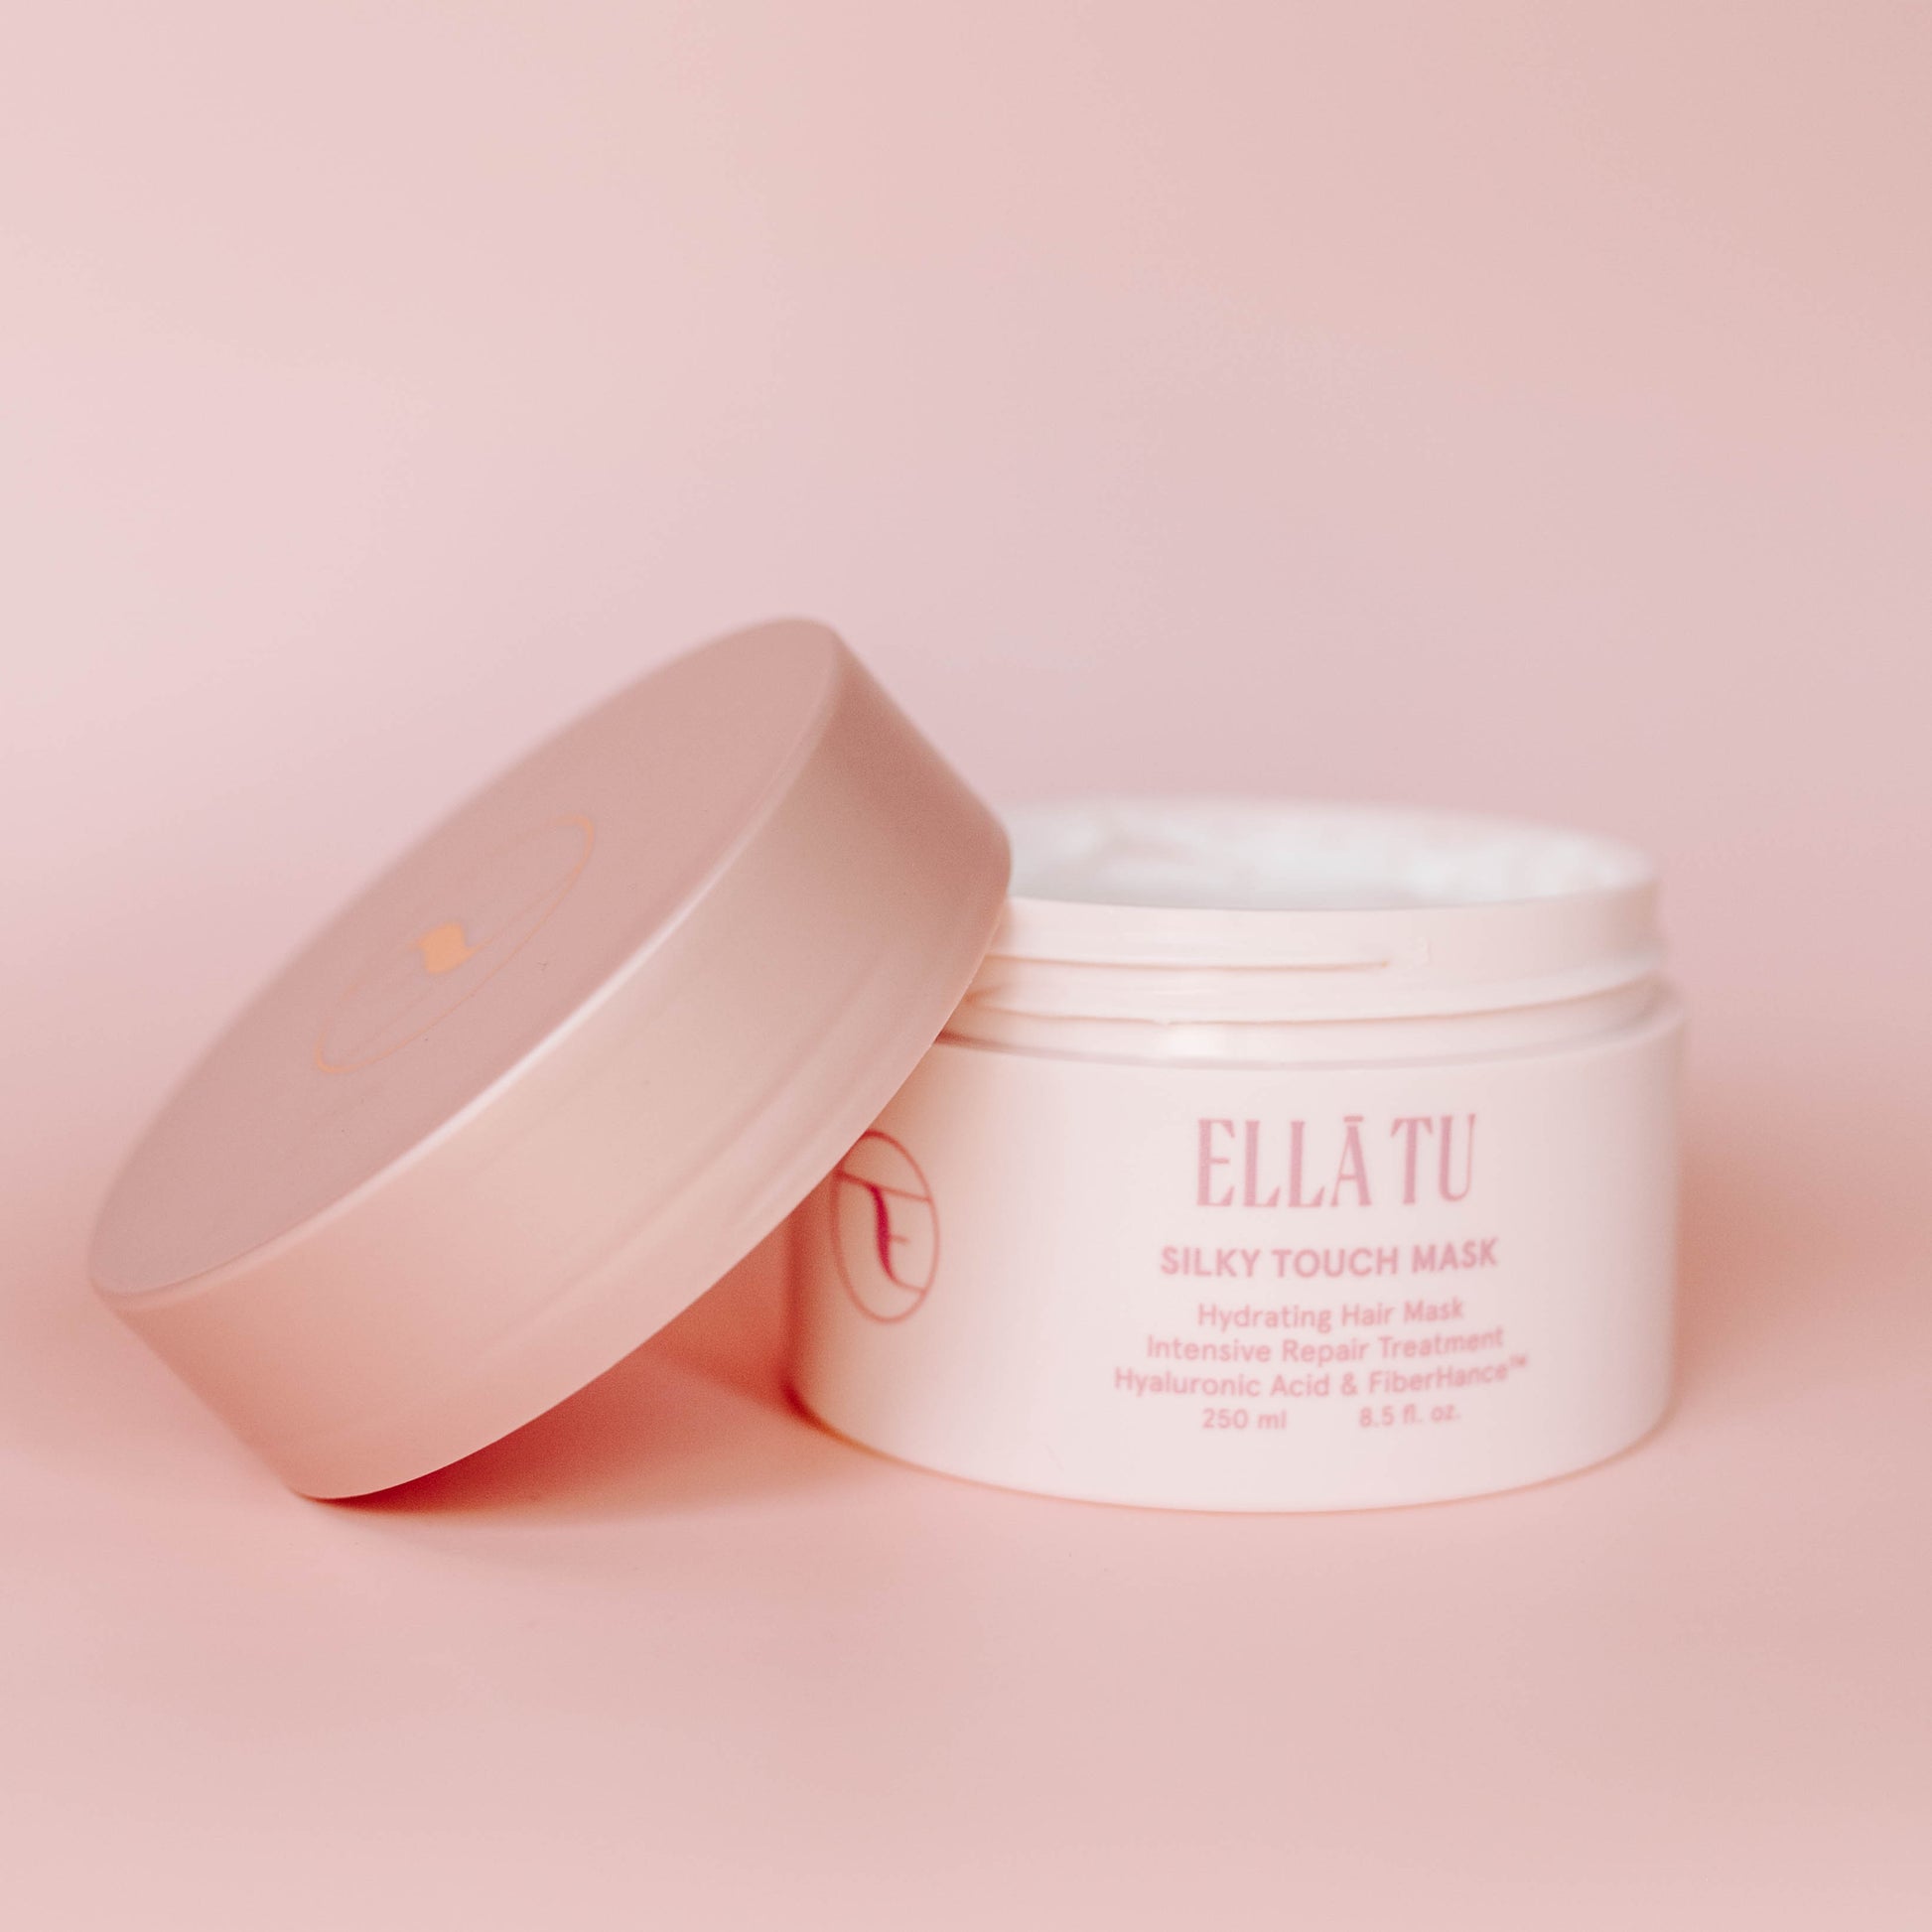 Deeply hydrate and condition your hair with the Ellatu Hair Mask. Vitamin E, Hyaluronic Acid, Moringa Oil, Castor Oil and of course, the patented ingredient Fiberhance for deep hydration, bond building incredible scent. Take control of your hair today. Made for dry, damaged, frizzy hair